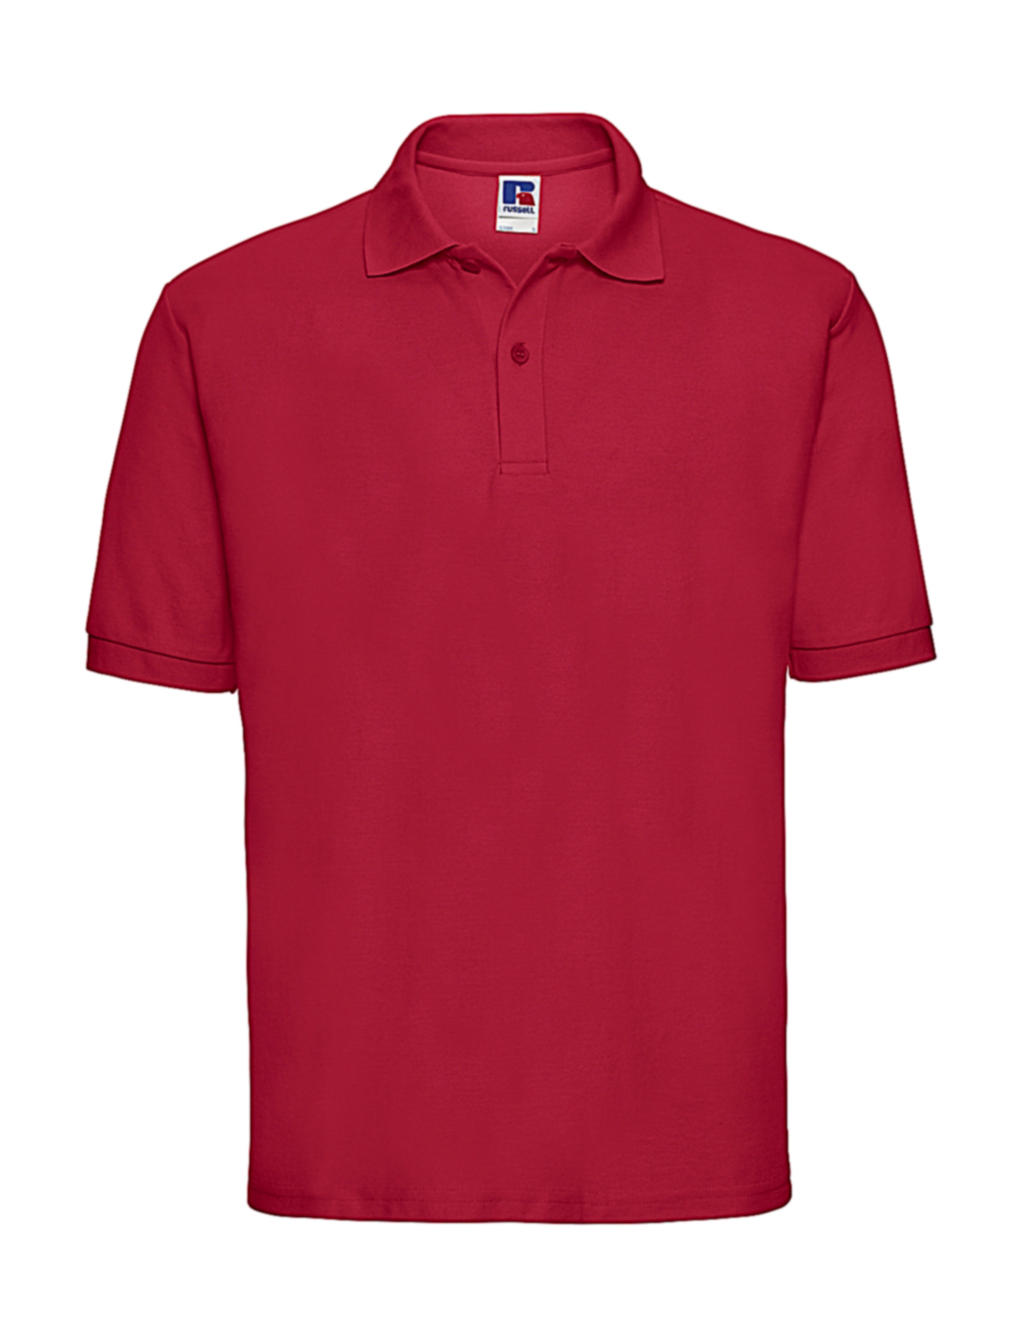  Mens Classic Polycotton Polo in Farbe Classic Red